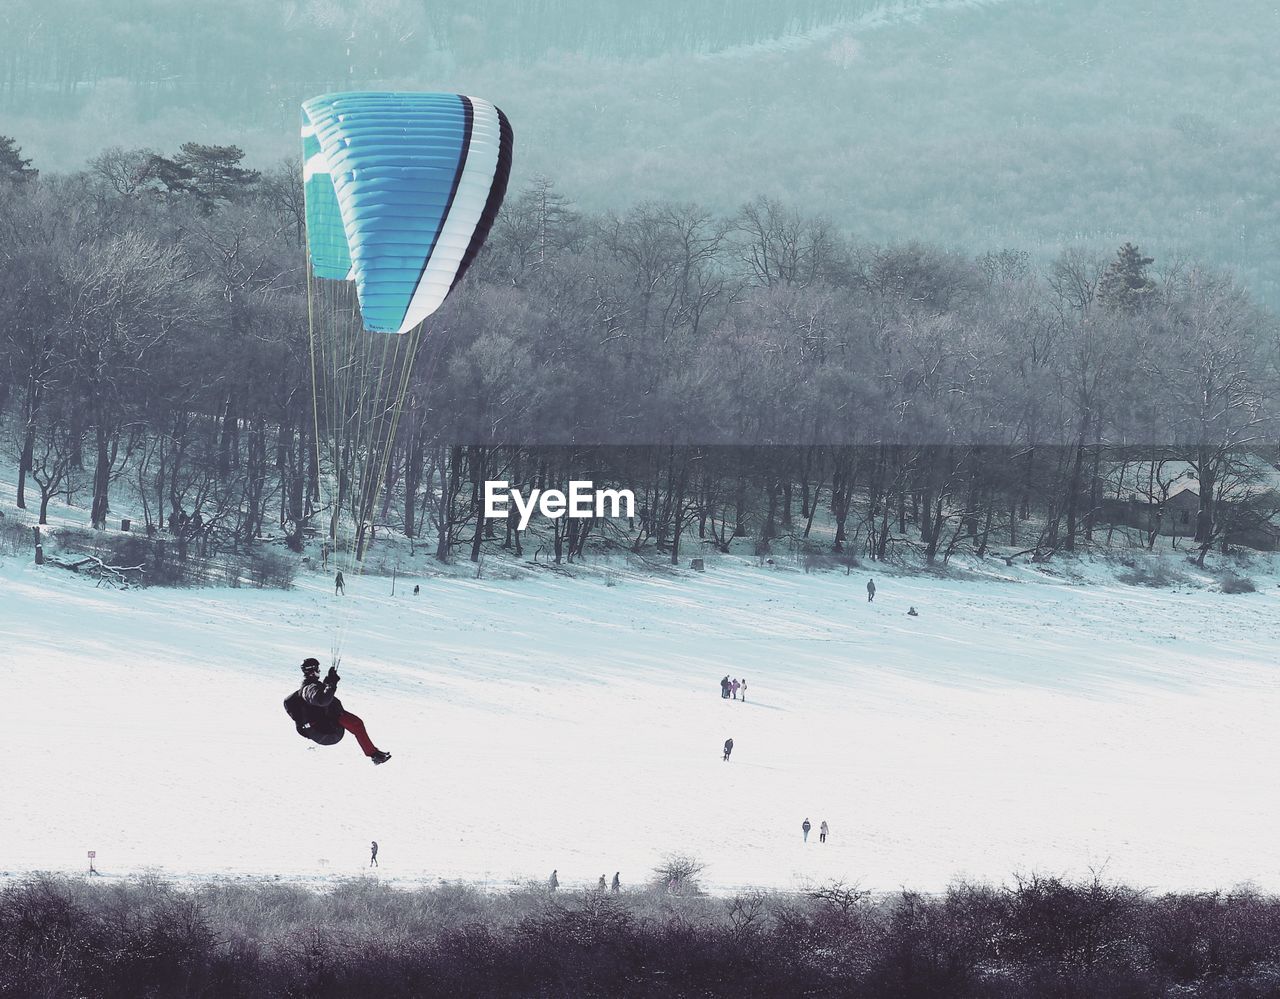 PERSON PARAGLIDING IN WINTER